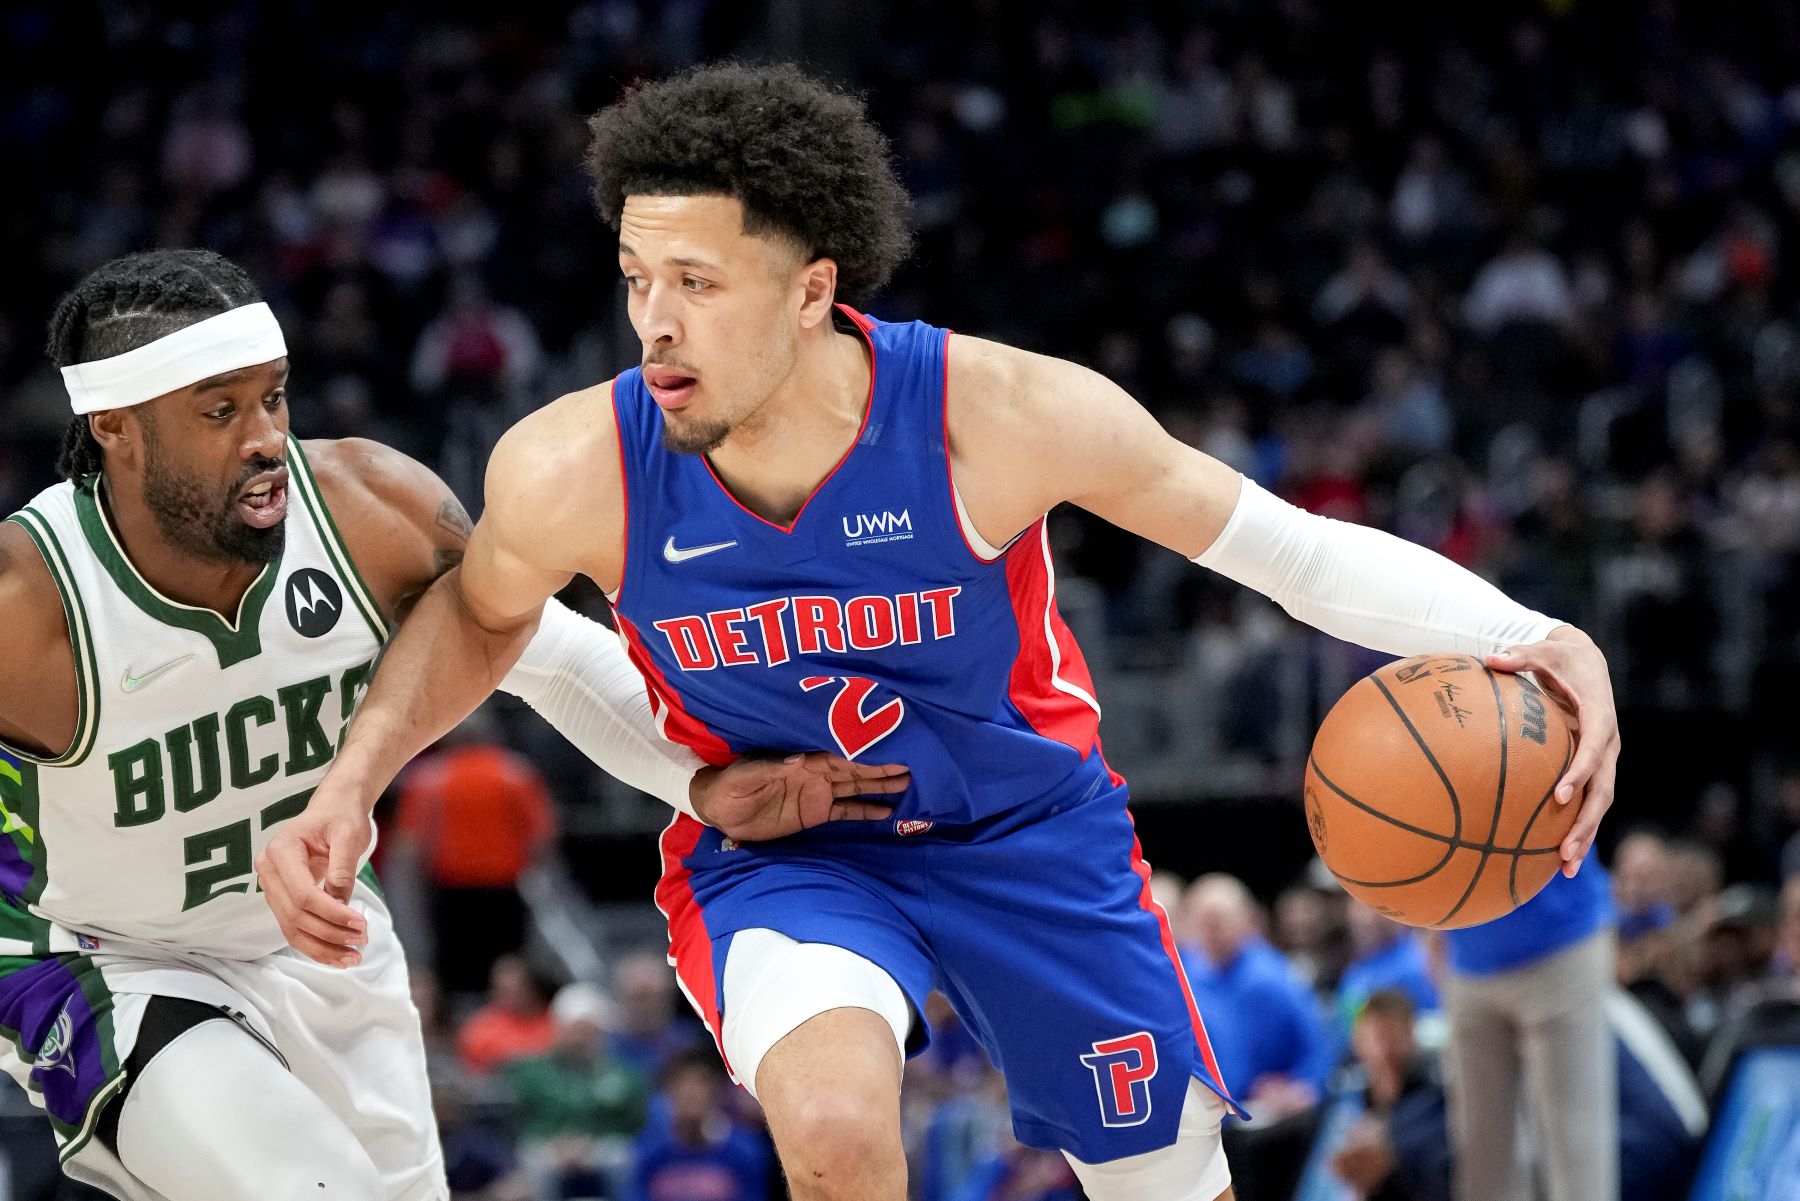 Cade Cunningham #2 of the Detroit Pistons playing against the Milwaukee Bucks